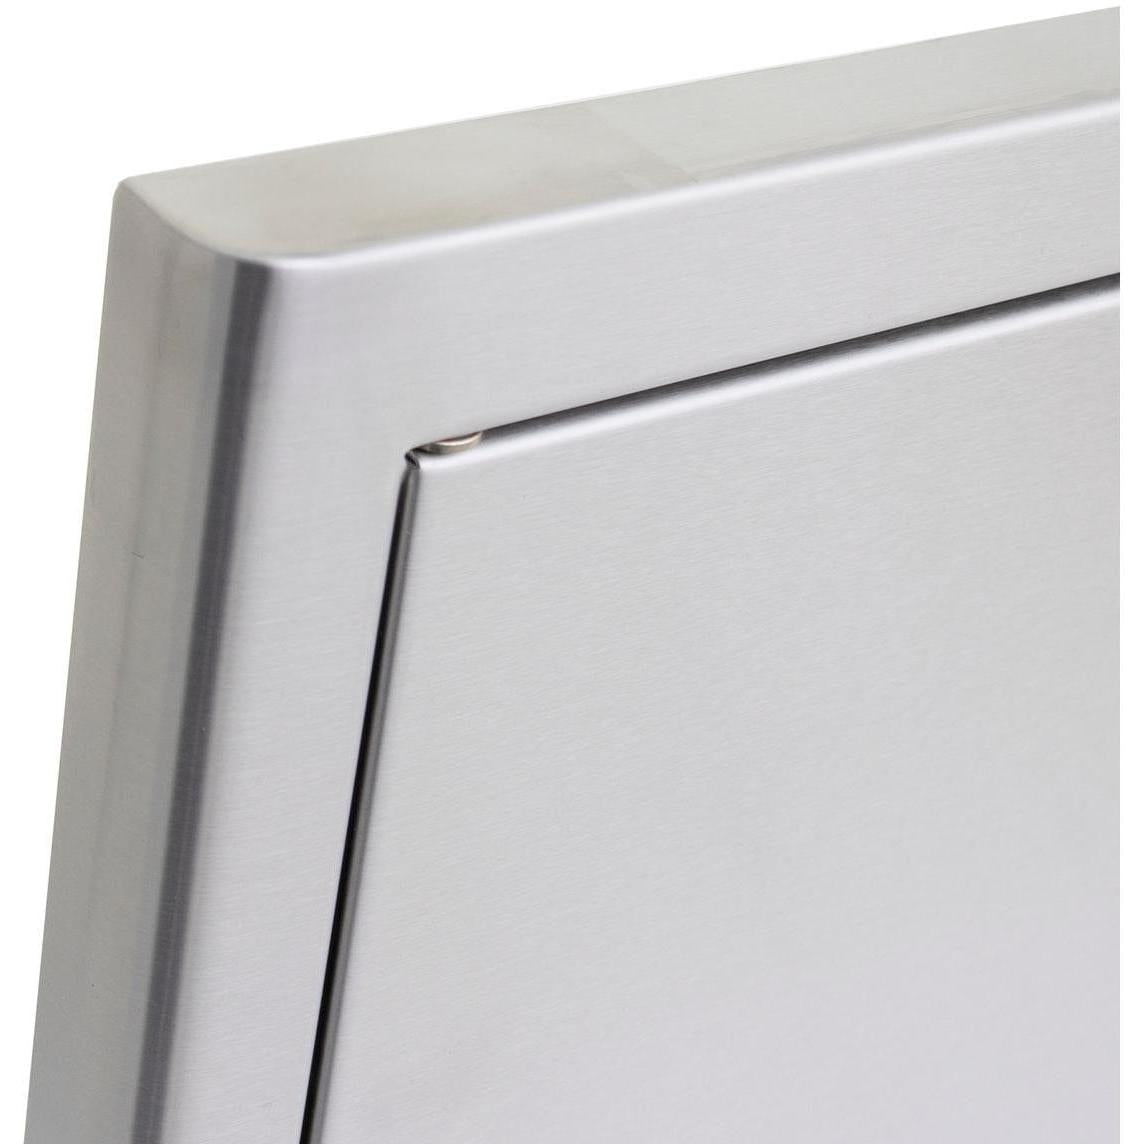 Blaze 18-Inch Right Hinged Stainless Steel Single Access Door - Vertical - BLZ-SV-1420-R